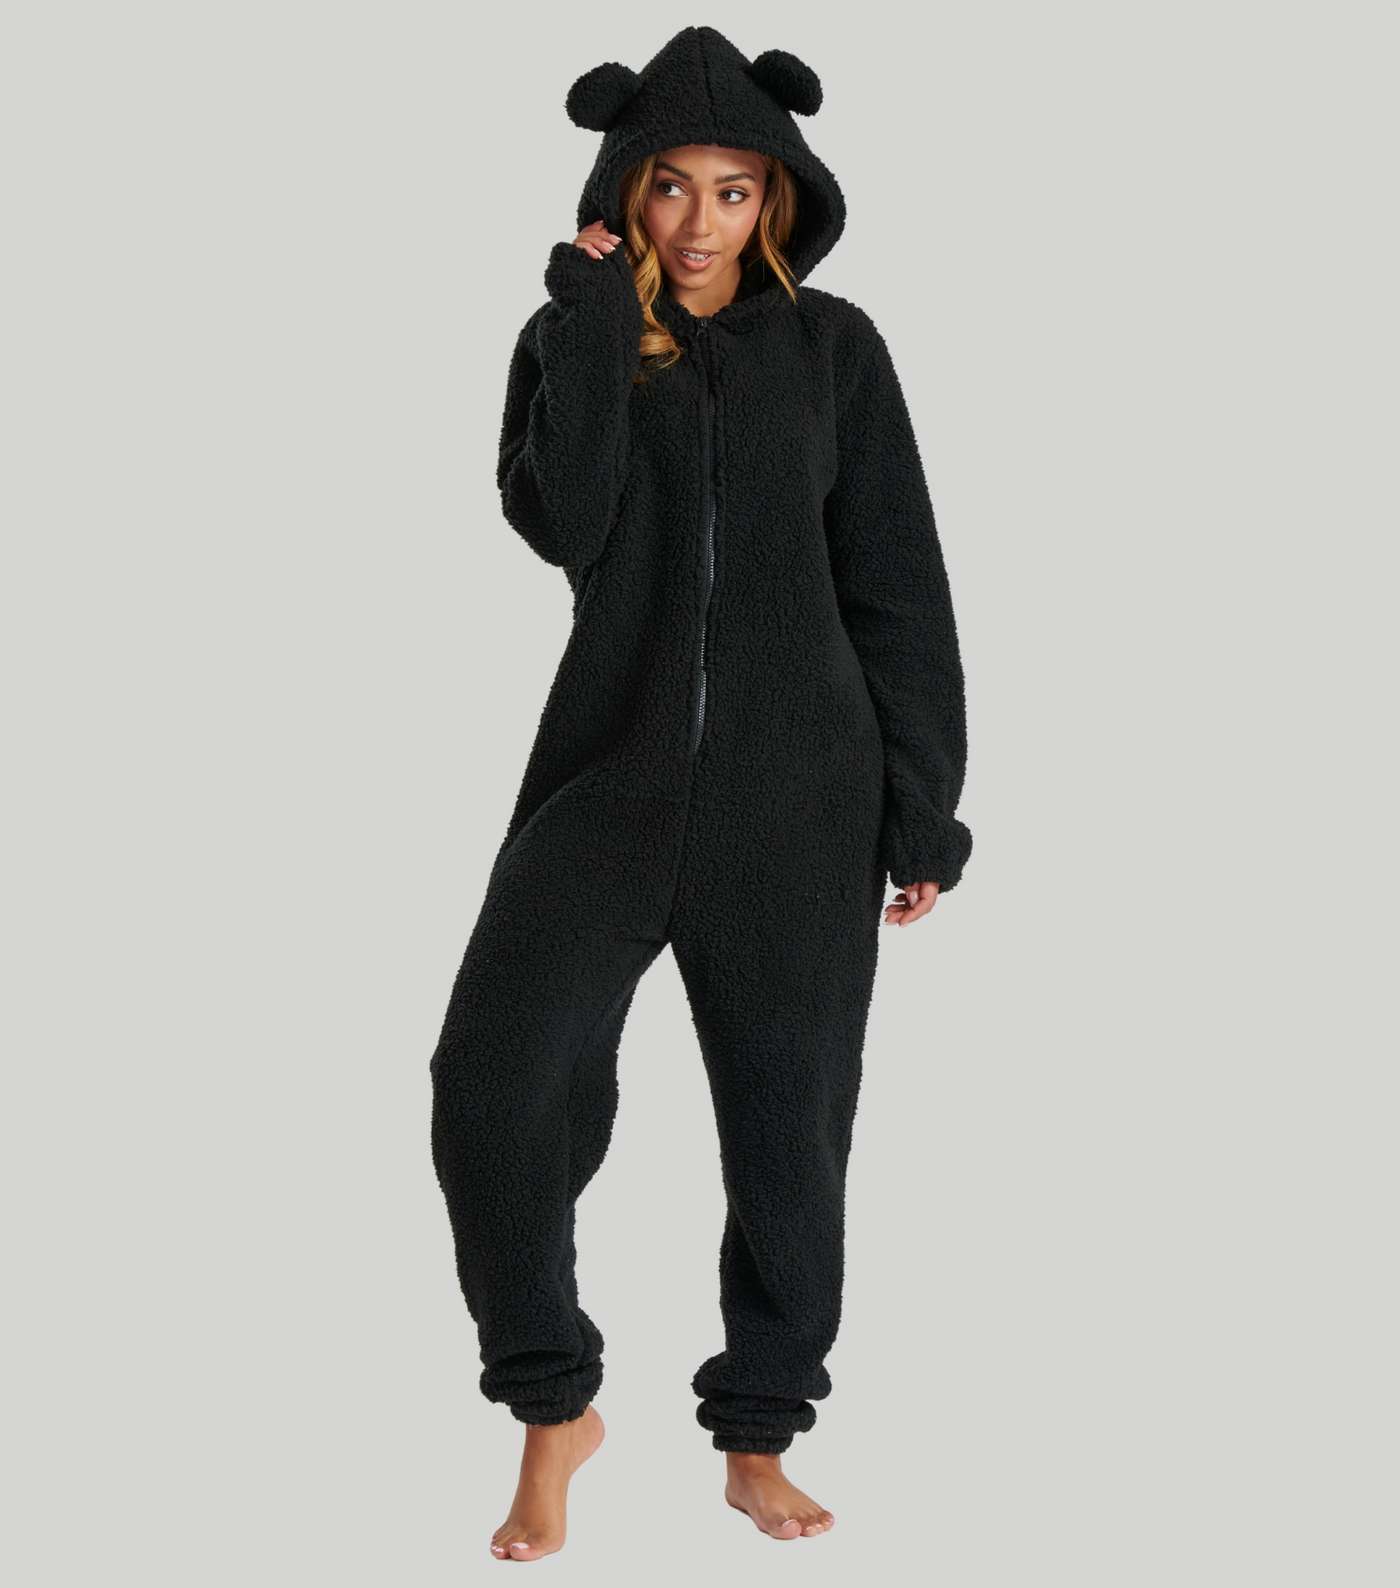 Loungeable Black Borg Onesie with Ears Image 3